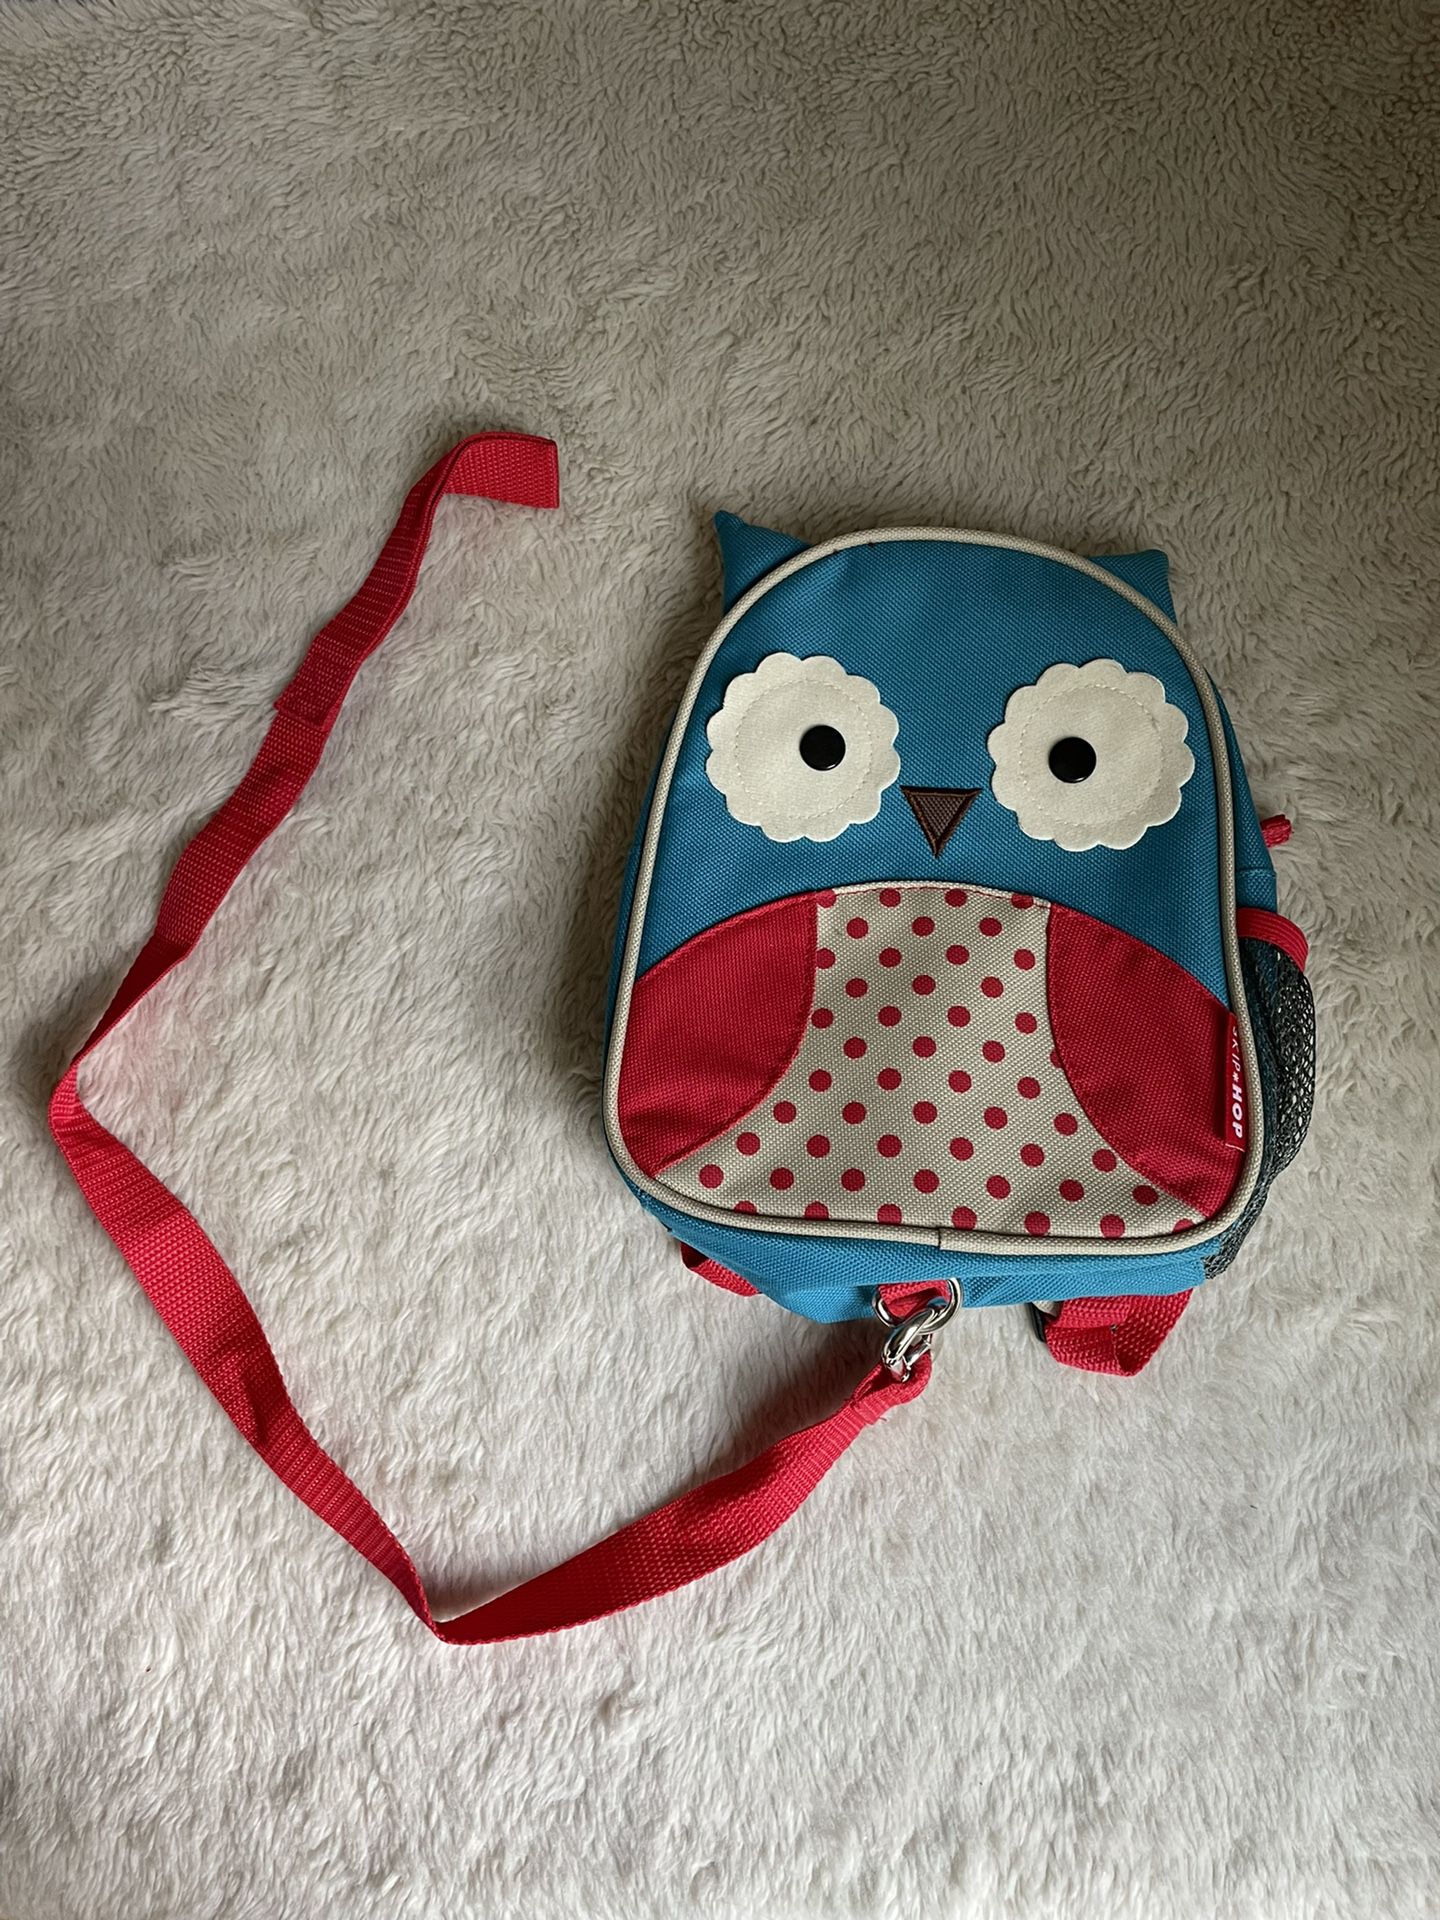 Skip Hop Leash Mini Backpack with Adorable Owl Theme Great For Travel Hiking